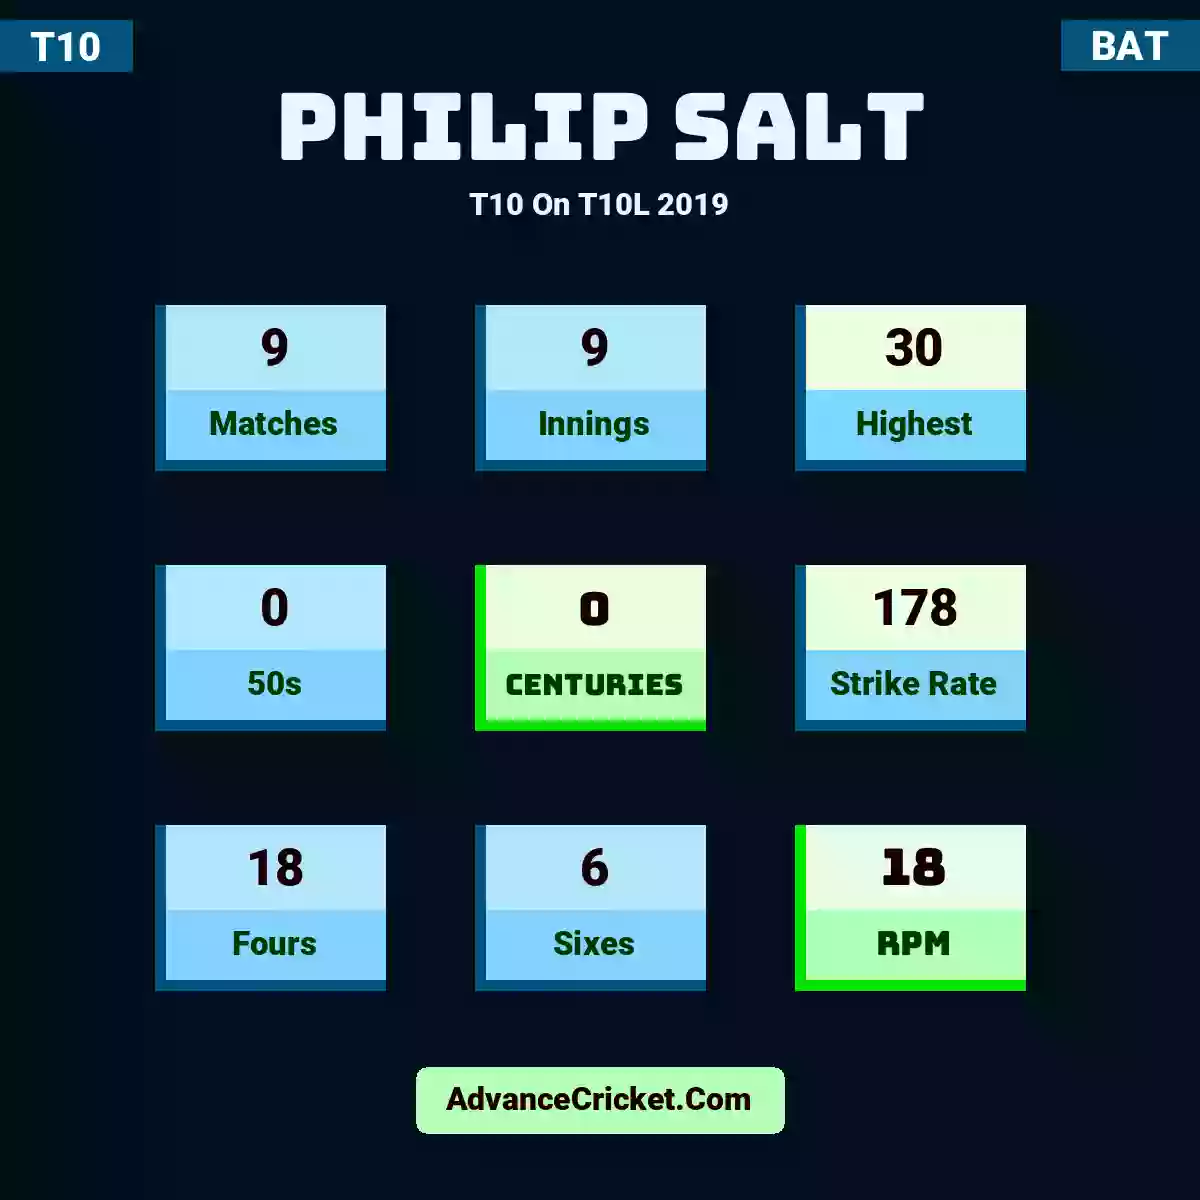 Philip Salt T10  On T10L 2019, Philip Salt played 9 matches, scored 30 runs as highest, 0 half-centuries, and 0 centuries, with a strike rate of 178. P.Salt hit 18 fours and 6 sixes, with an RPM of 18.